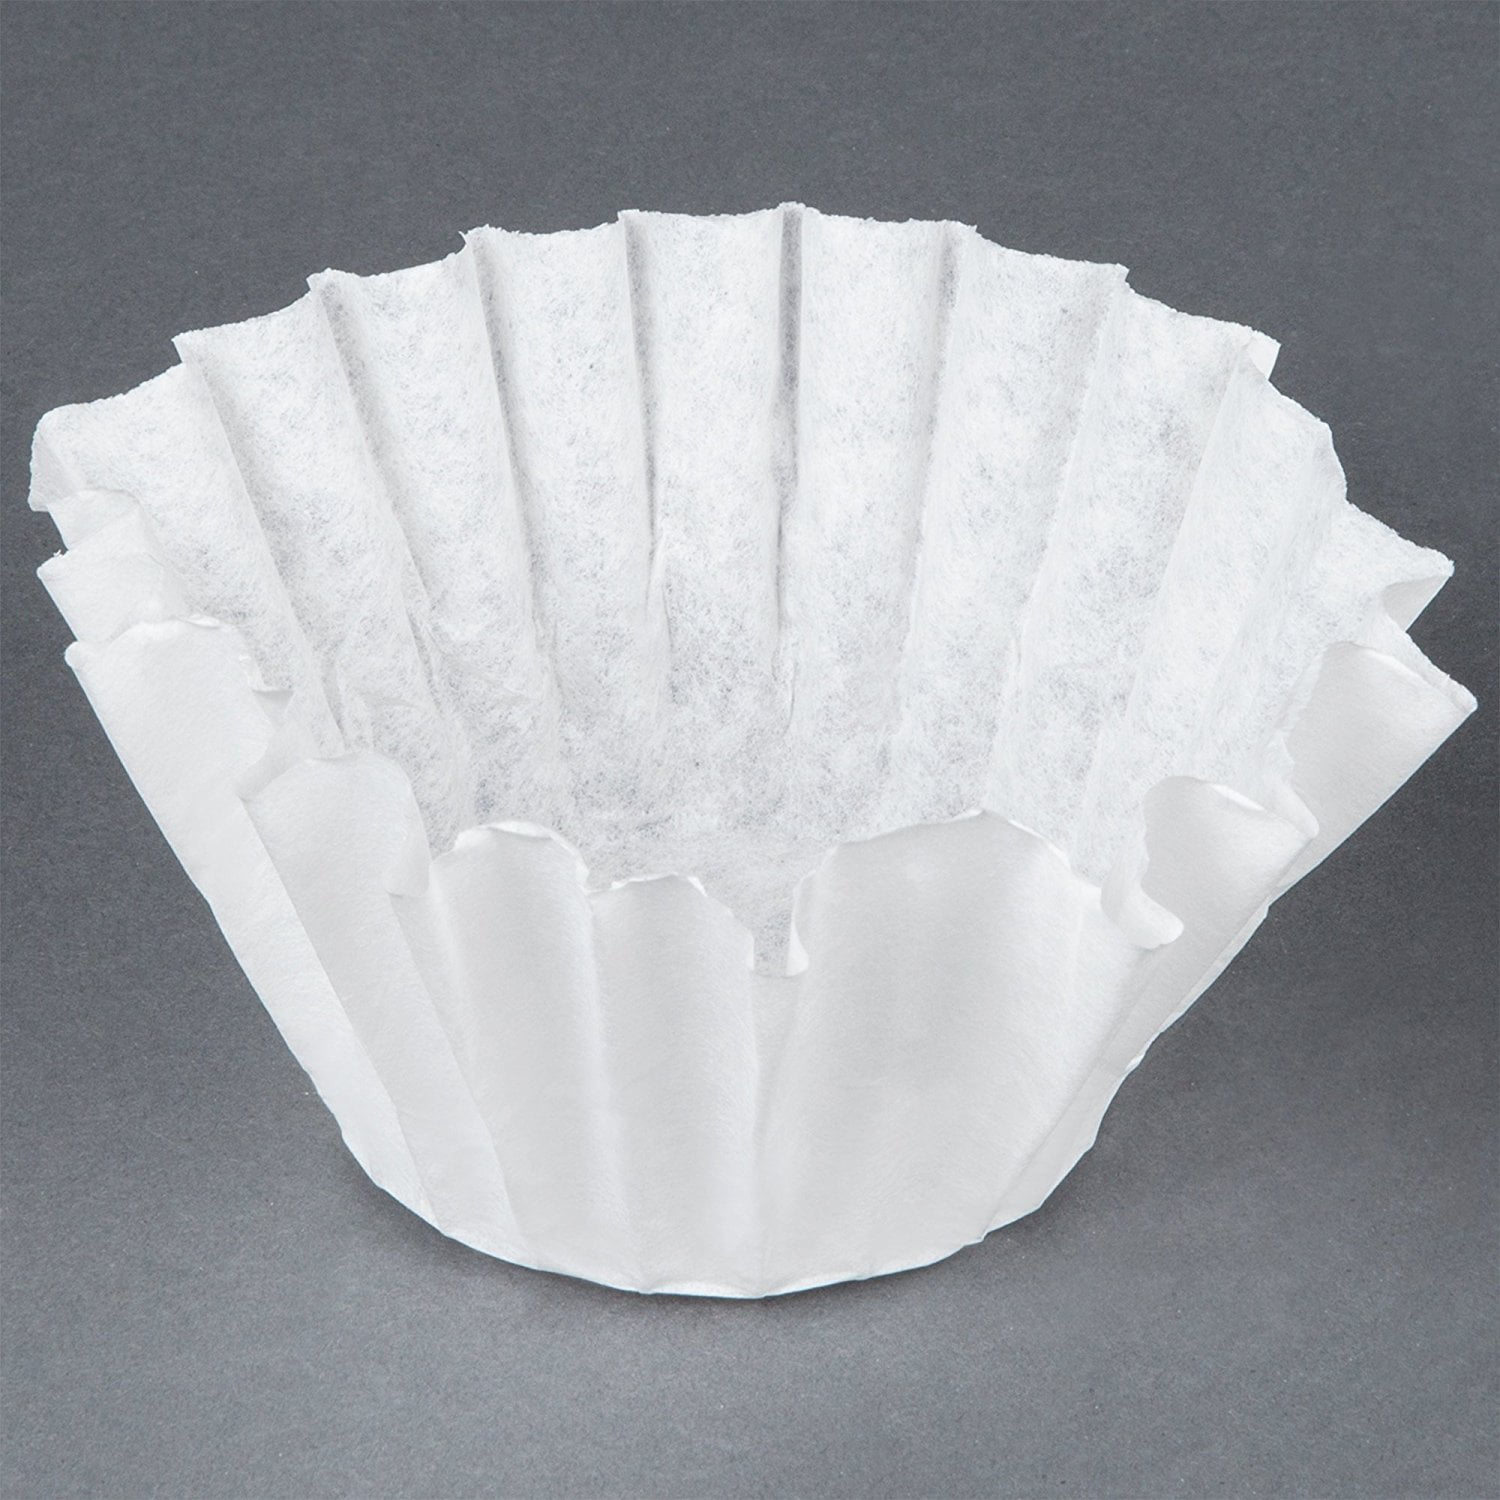 500-Count Bunn 12-Cup Commercial Coffee Filters 